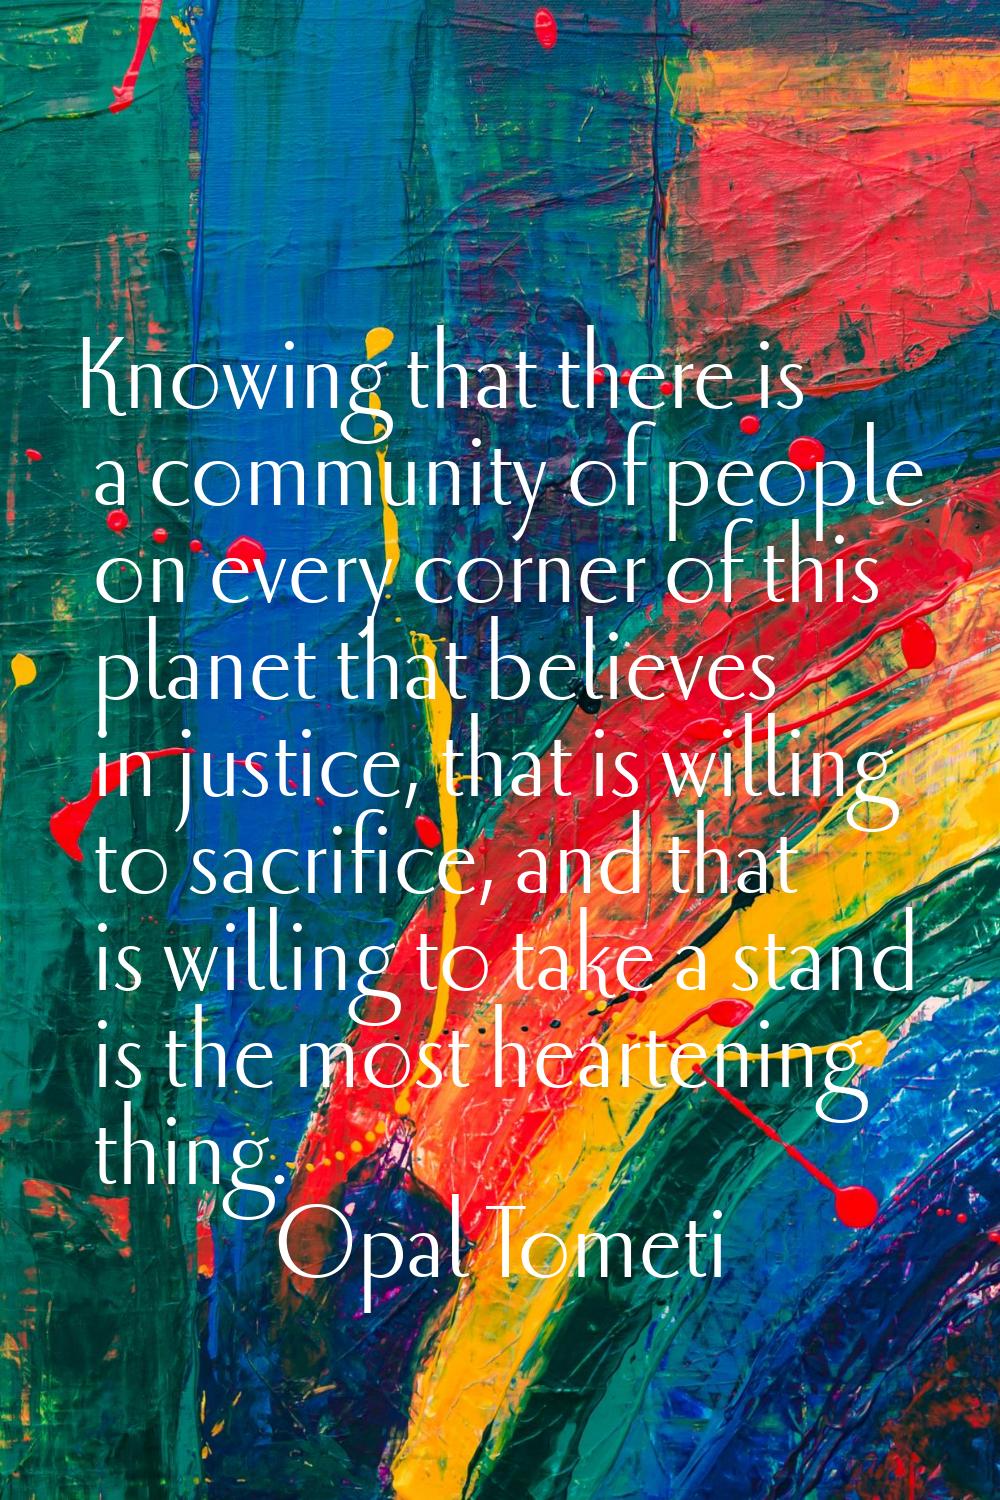 Knowing that there is a community of people on every corner of this planet that believes in justice